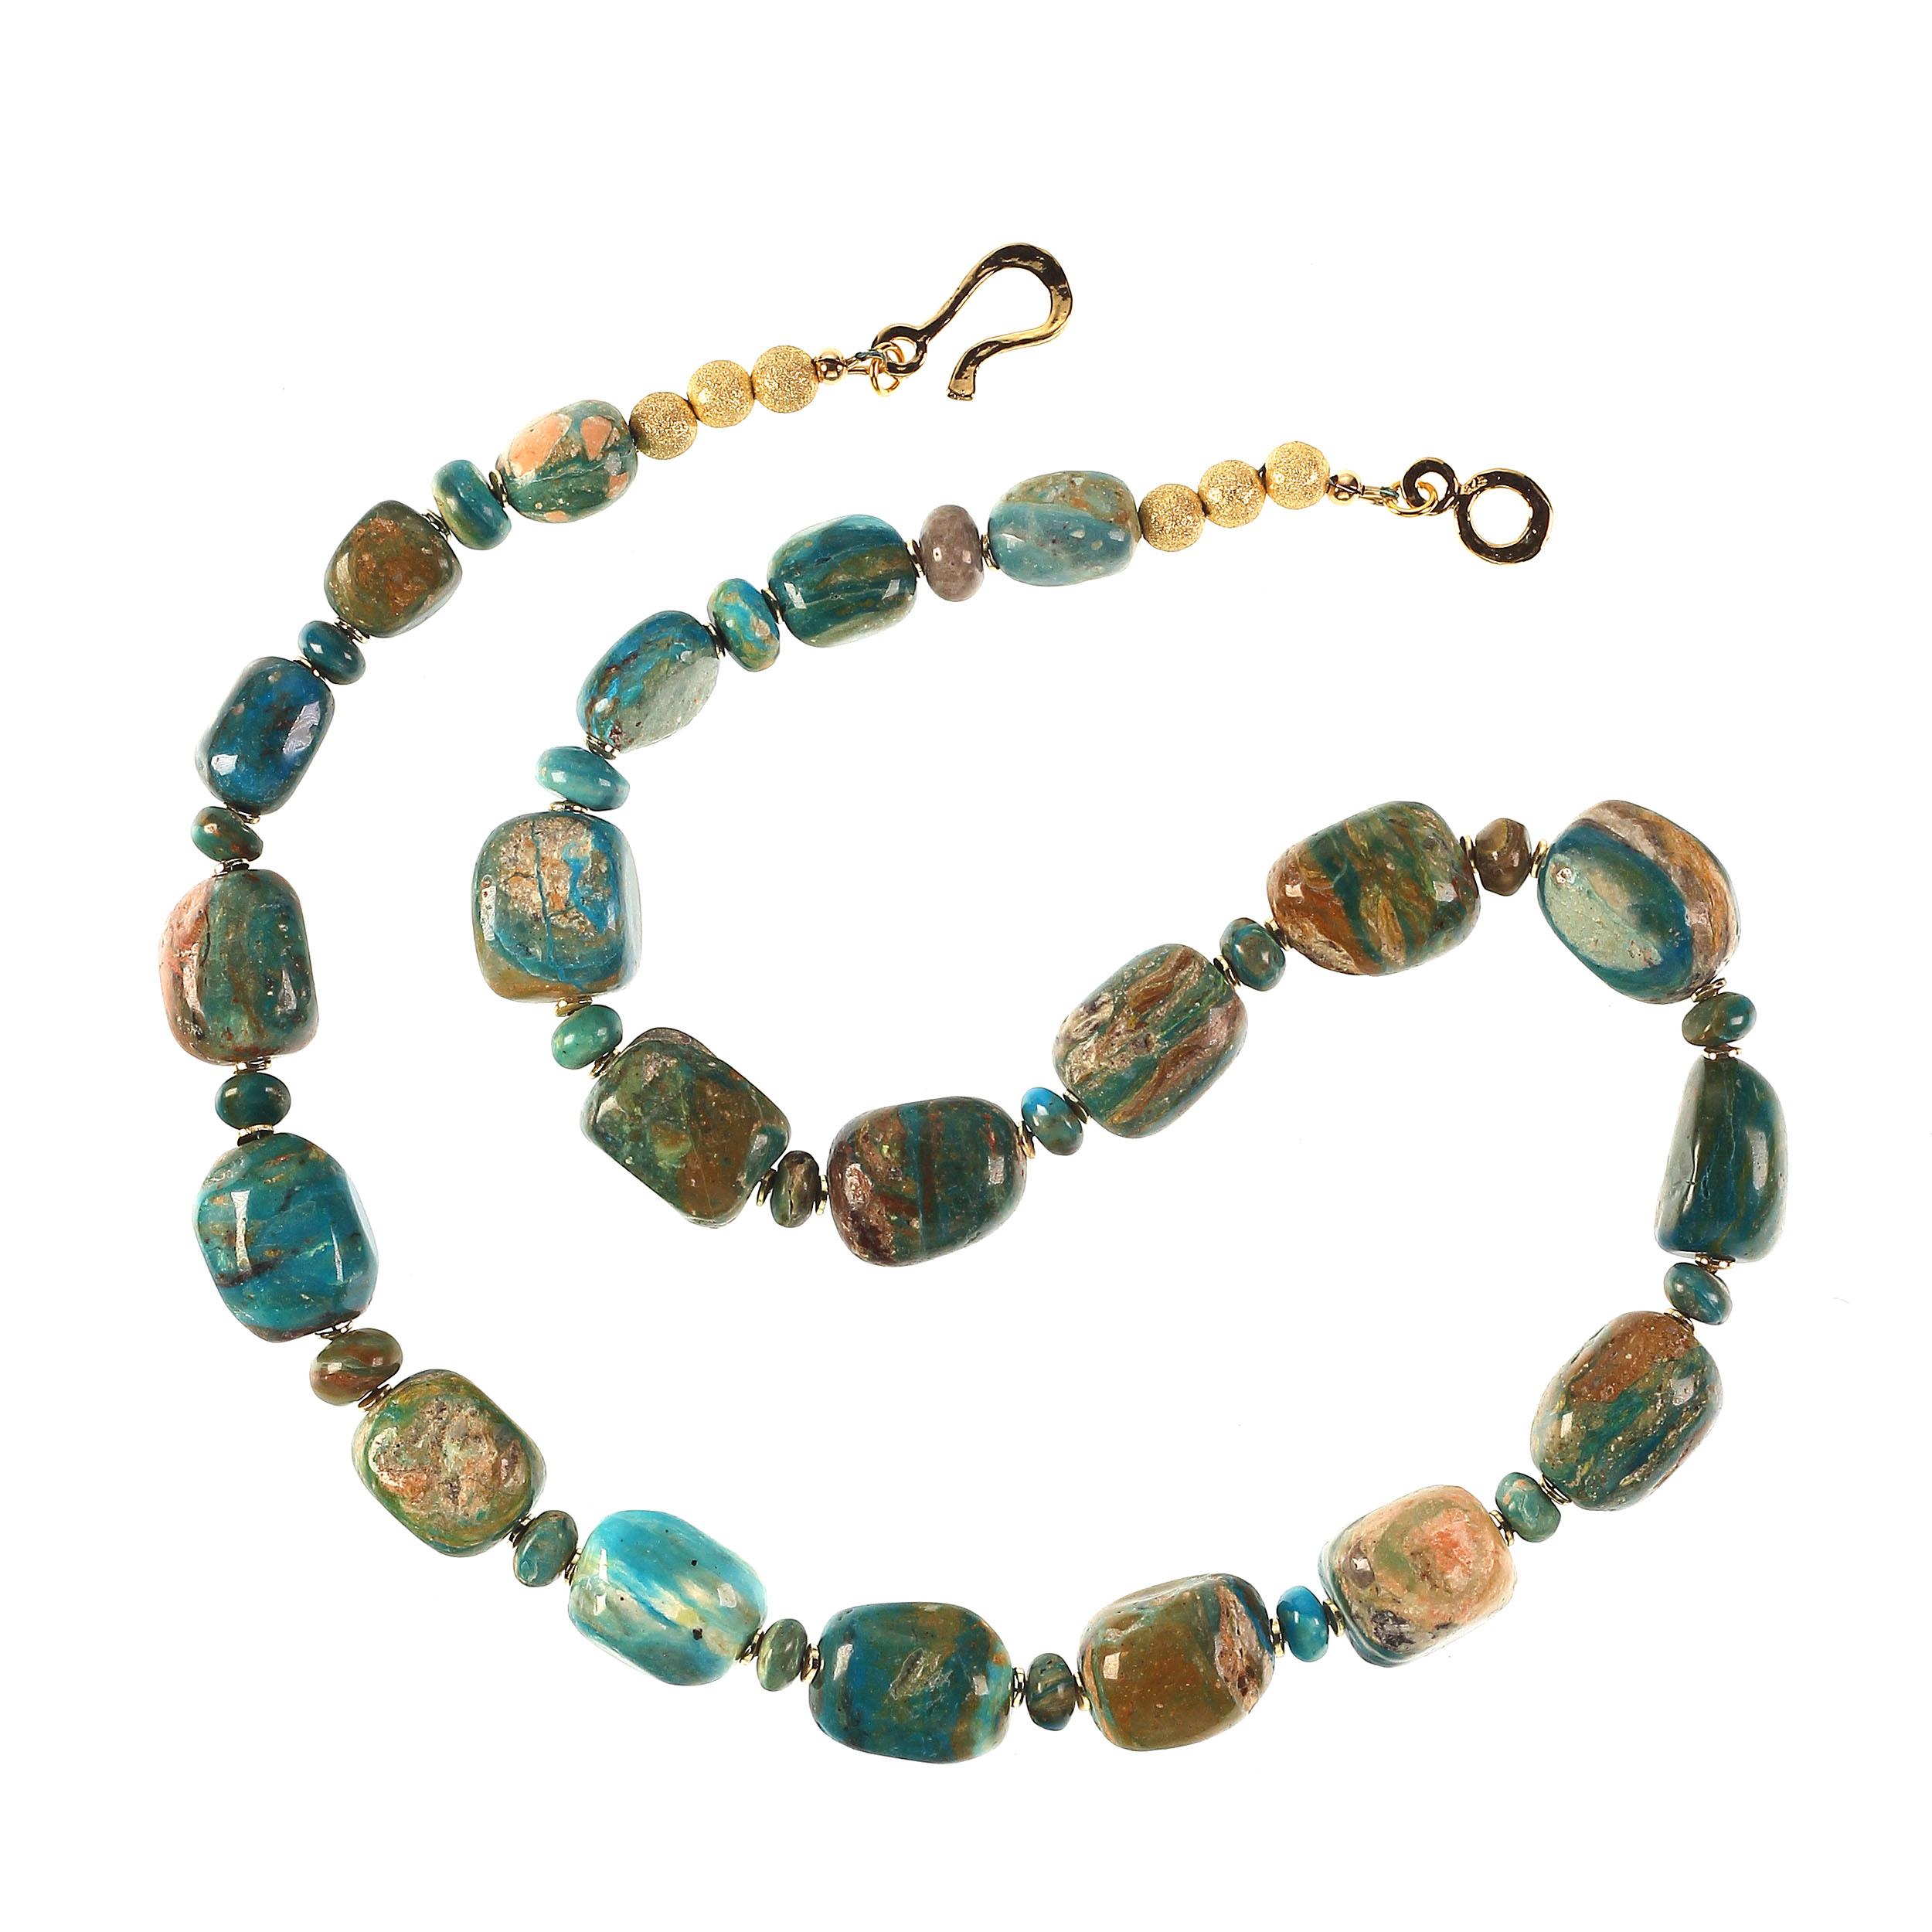 Artist Rustic Blue and Tan Peruvian Opal Cube Necklace with Goldy Accents